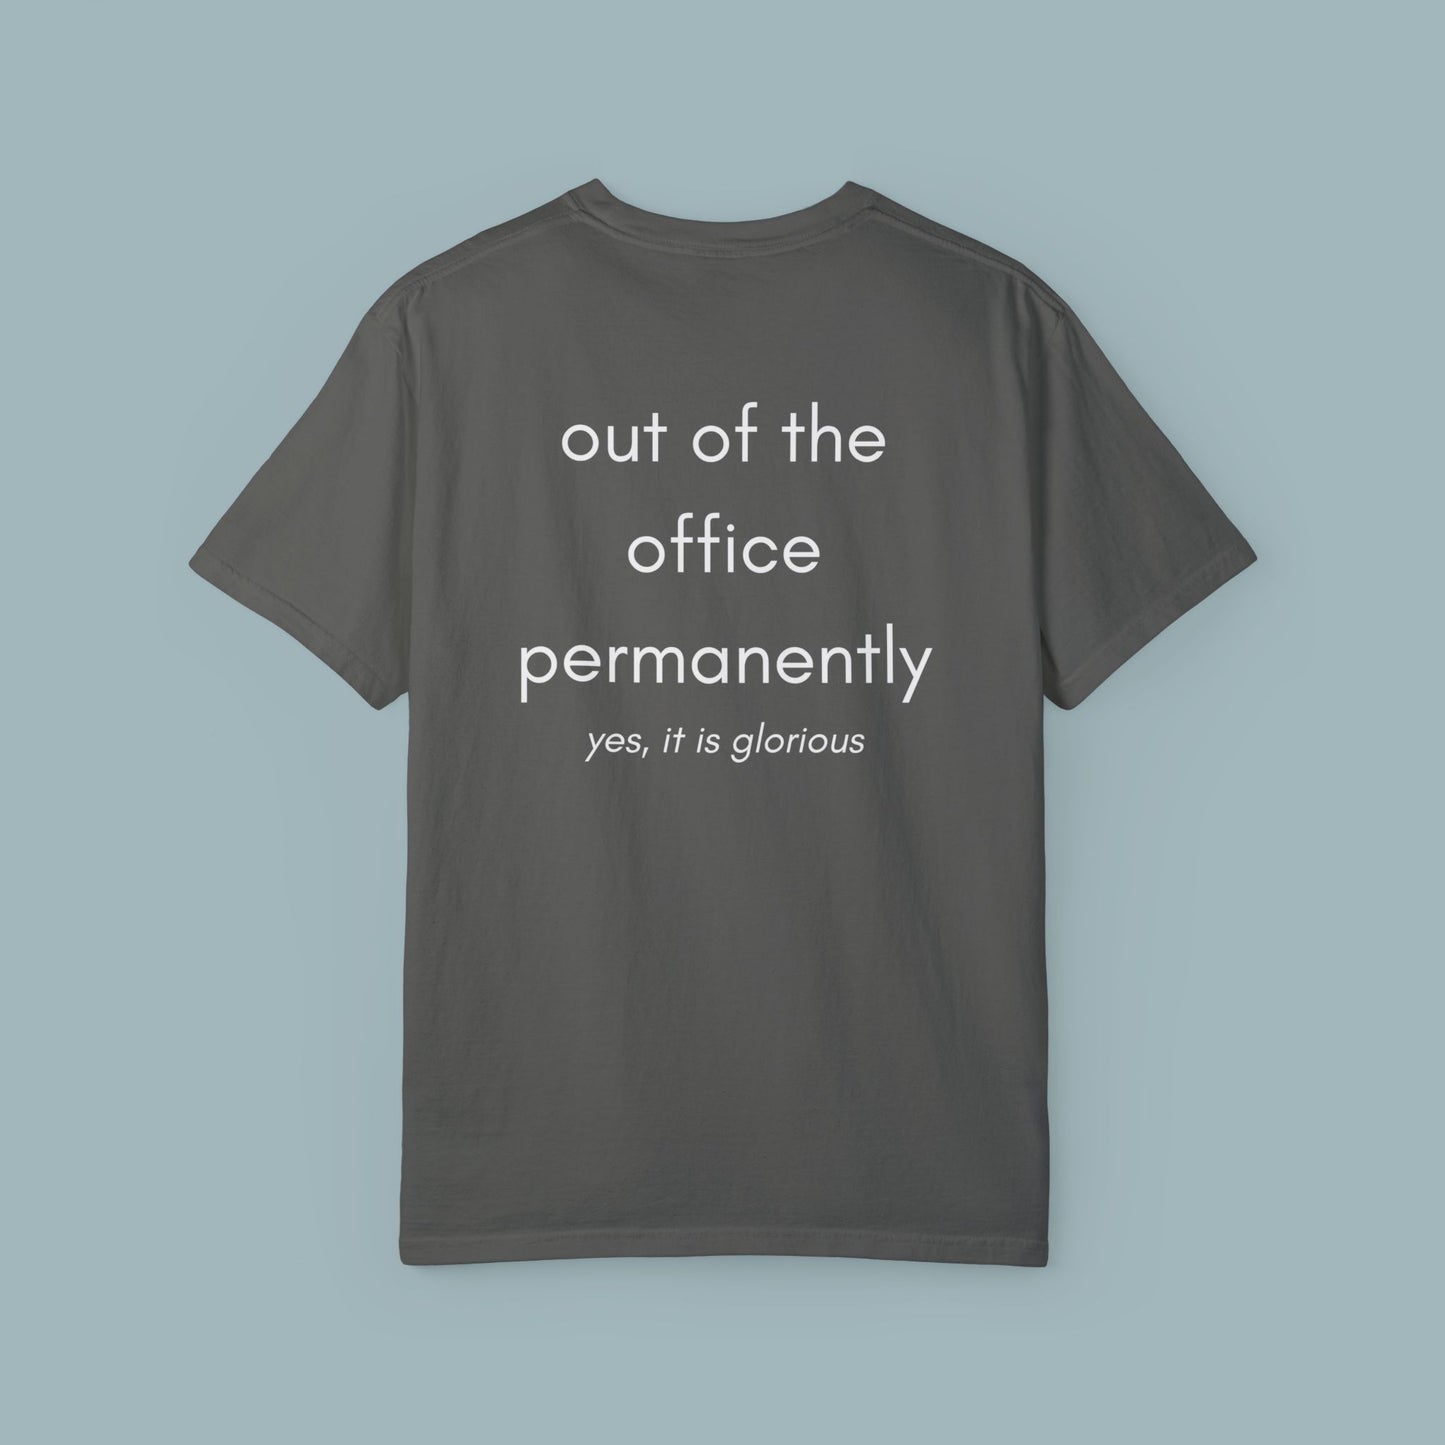 Retirement is a beautiful stage in life celebrated on this black only Unisex Garment-Dyed T-shirt. Great gift or get one for yourself.